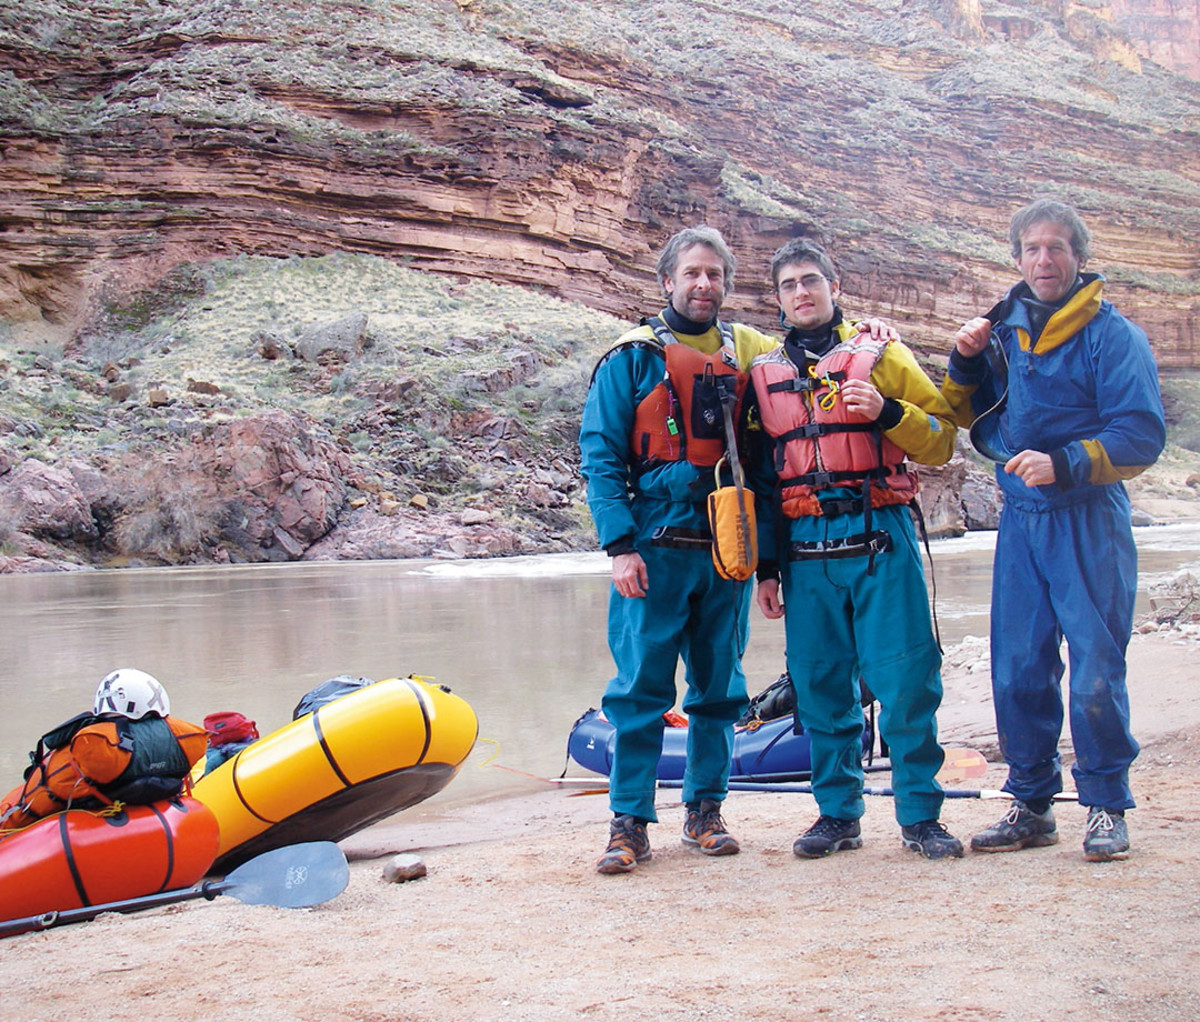 In 2008, Dial and his son floated the Grand Canyon in pack rafts, one of the first teams to do so.